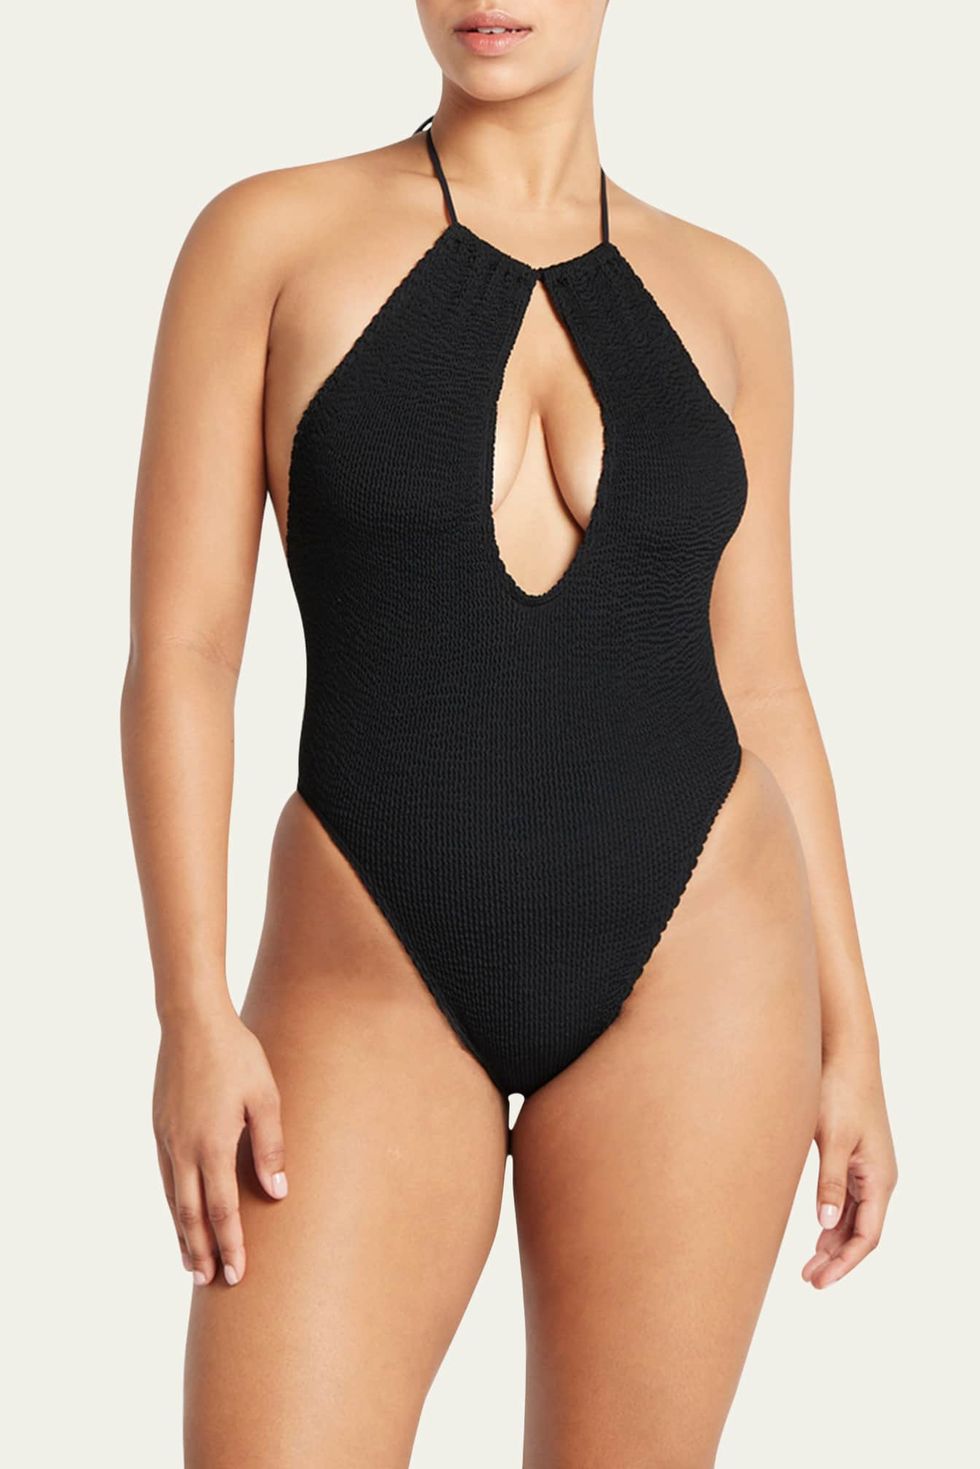 Ookioh is the Best New Swim Brand of 2018 - Allow Me to Introduce You to My  New Favorite Swim Brand